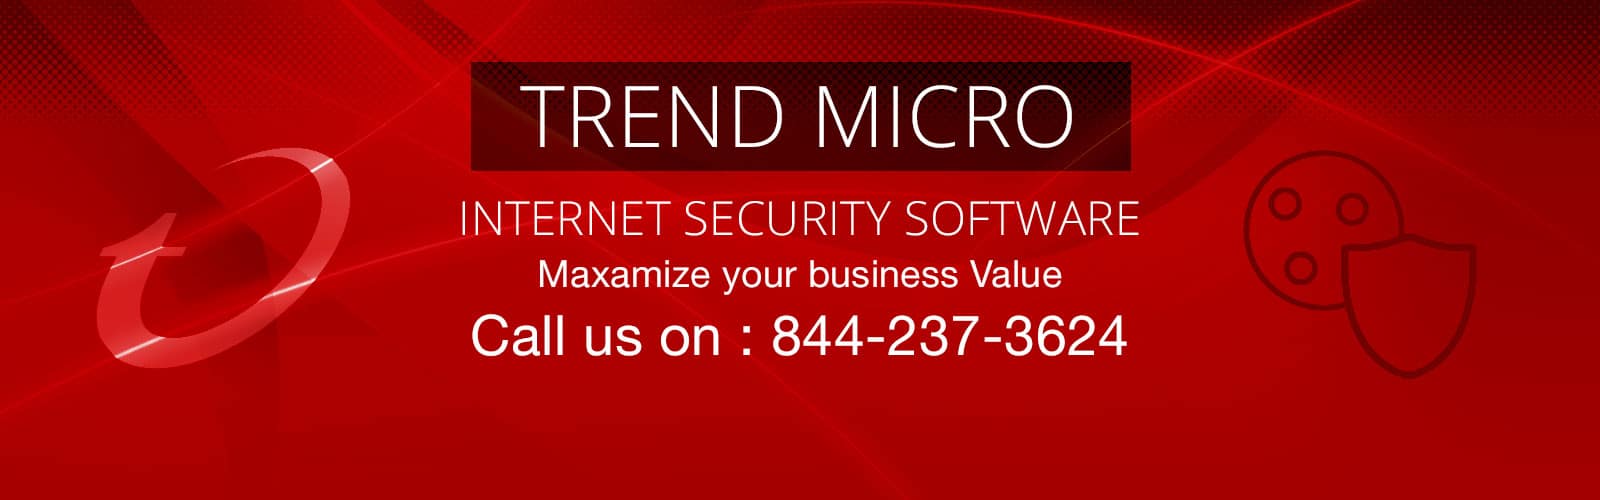 Trend micro download